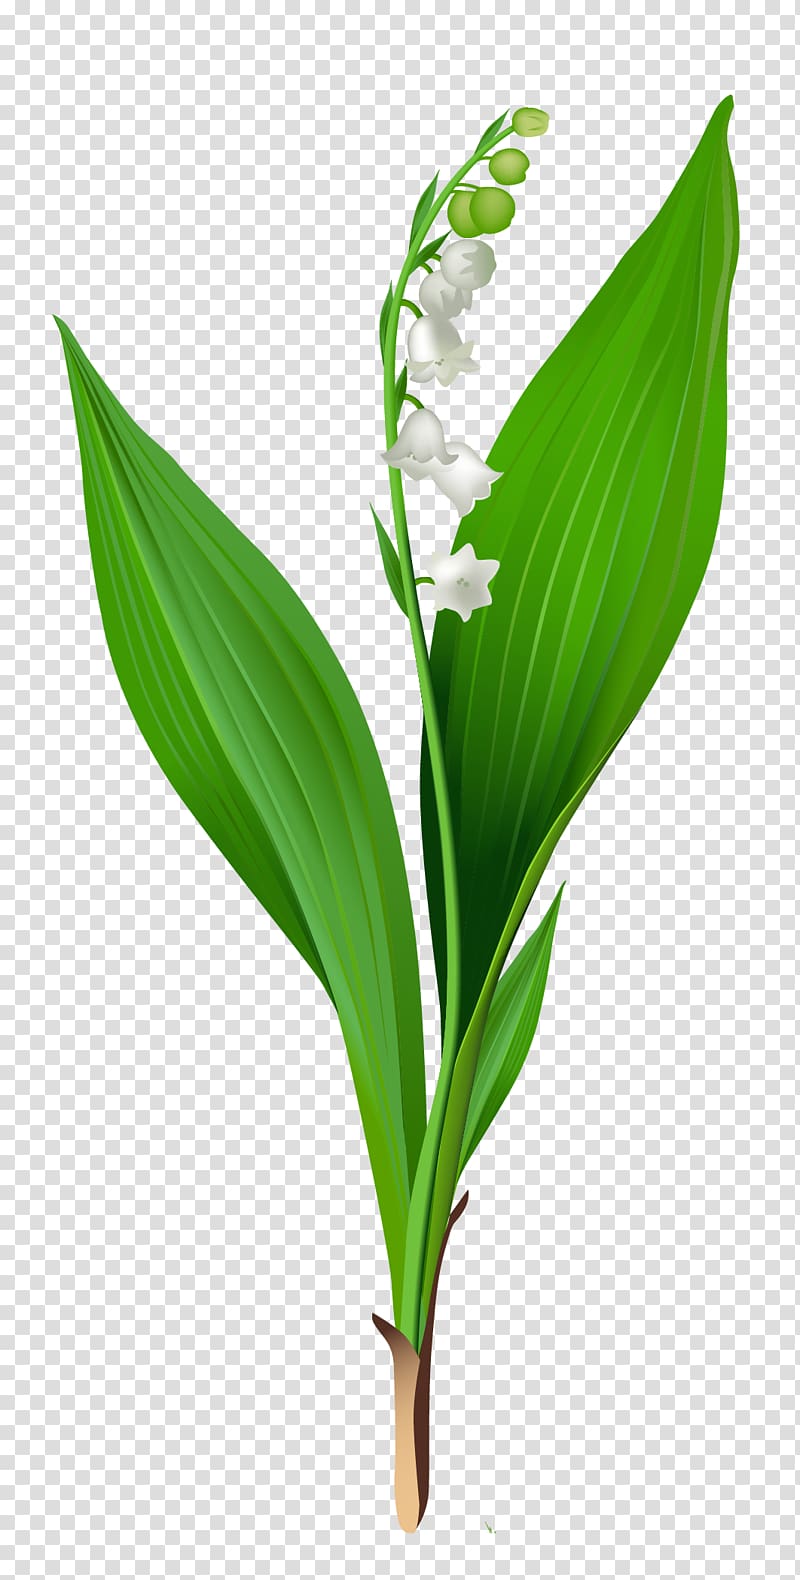 white flowers and green plant illustration, Lily of the valley Arum-lily Flower , Spring Lily of the Valley transparent background PNG clipart